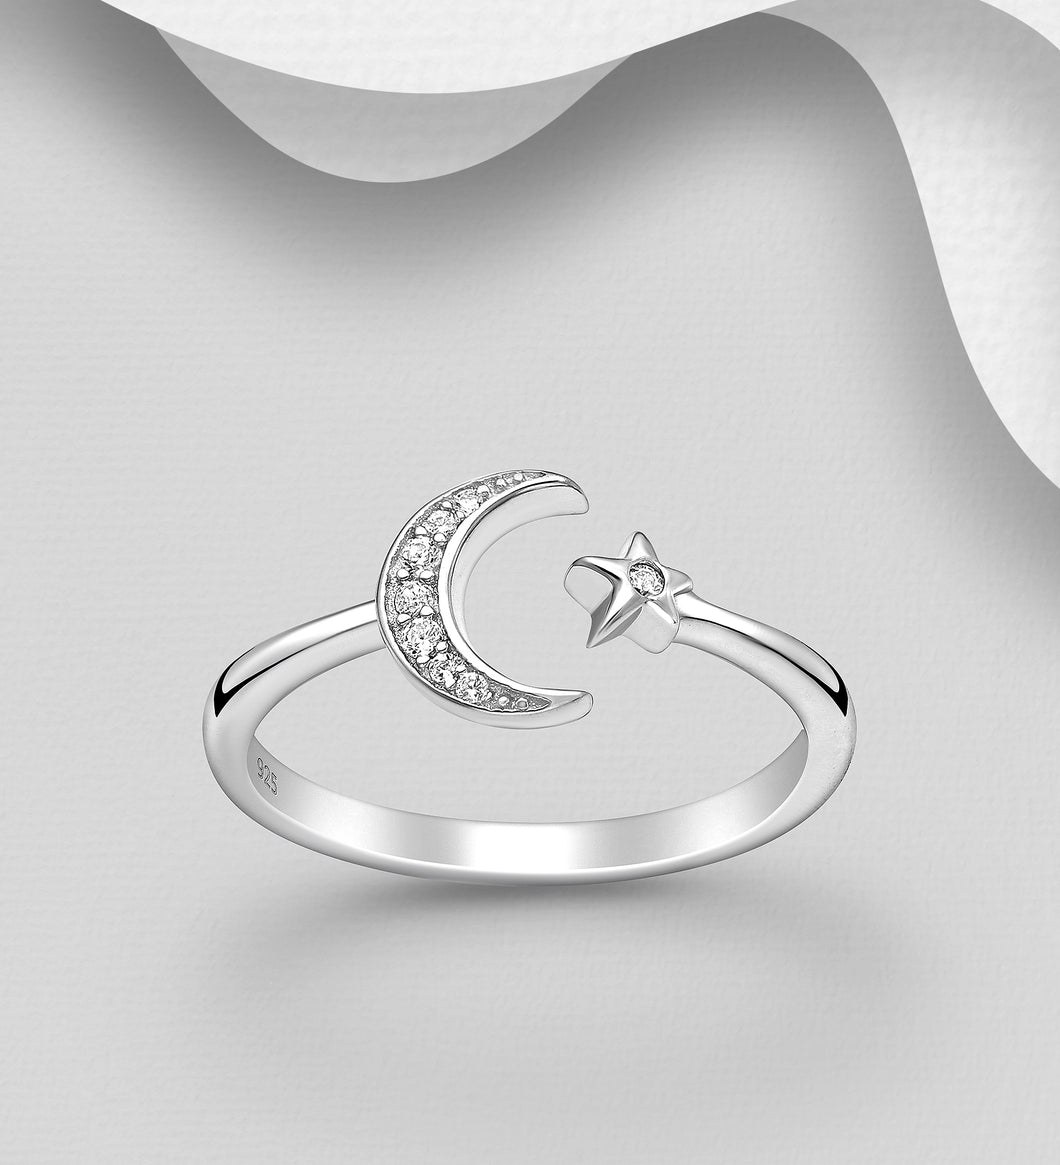 Sterling Silver Moon and Star adjustable Ring, Decorated with CZ Simulated Diamonds